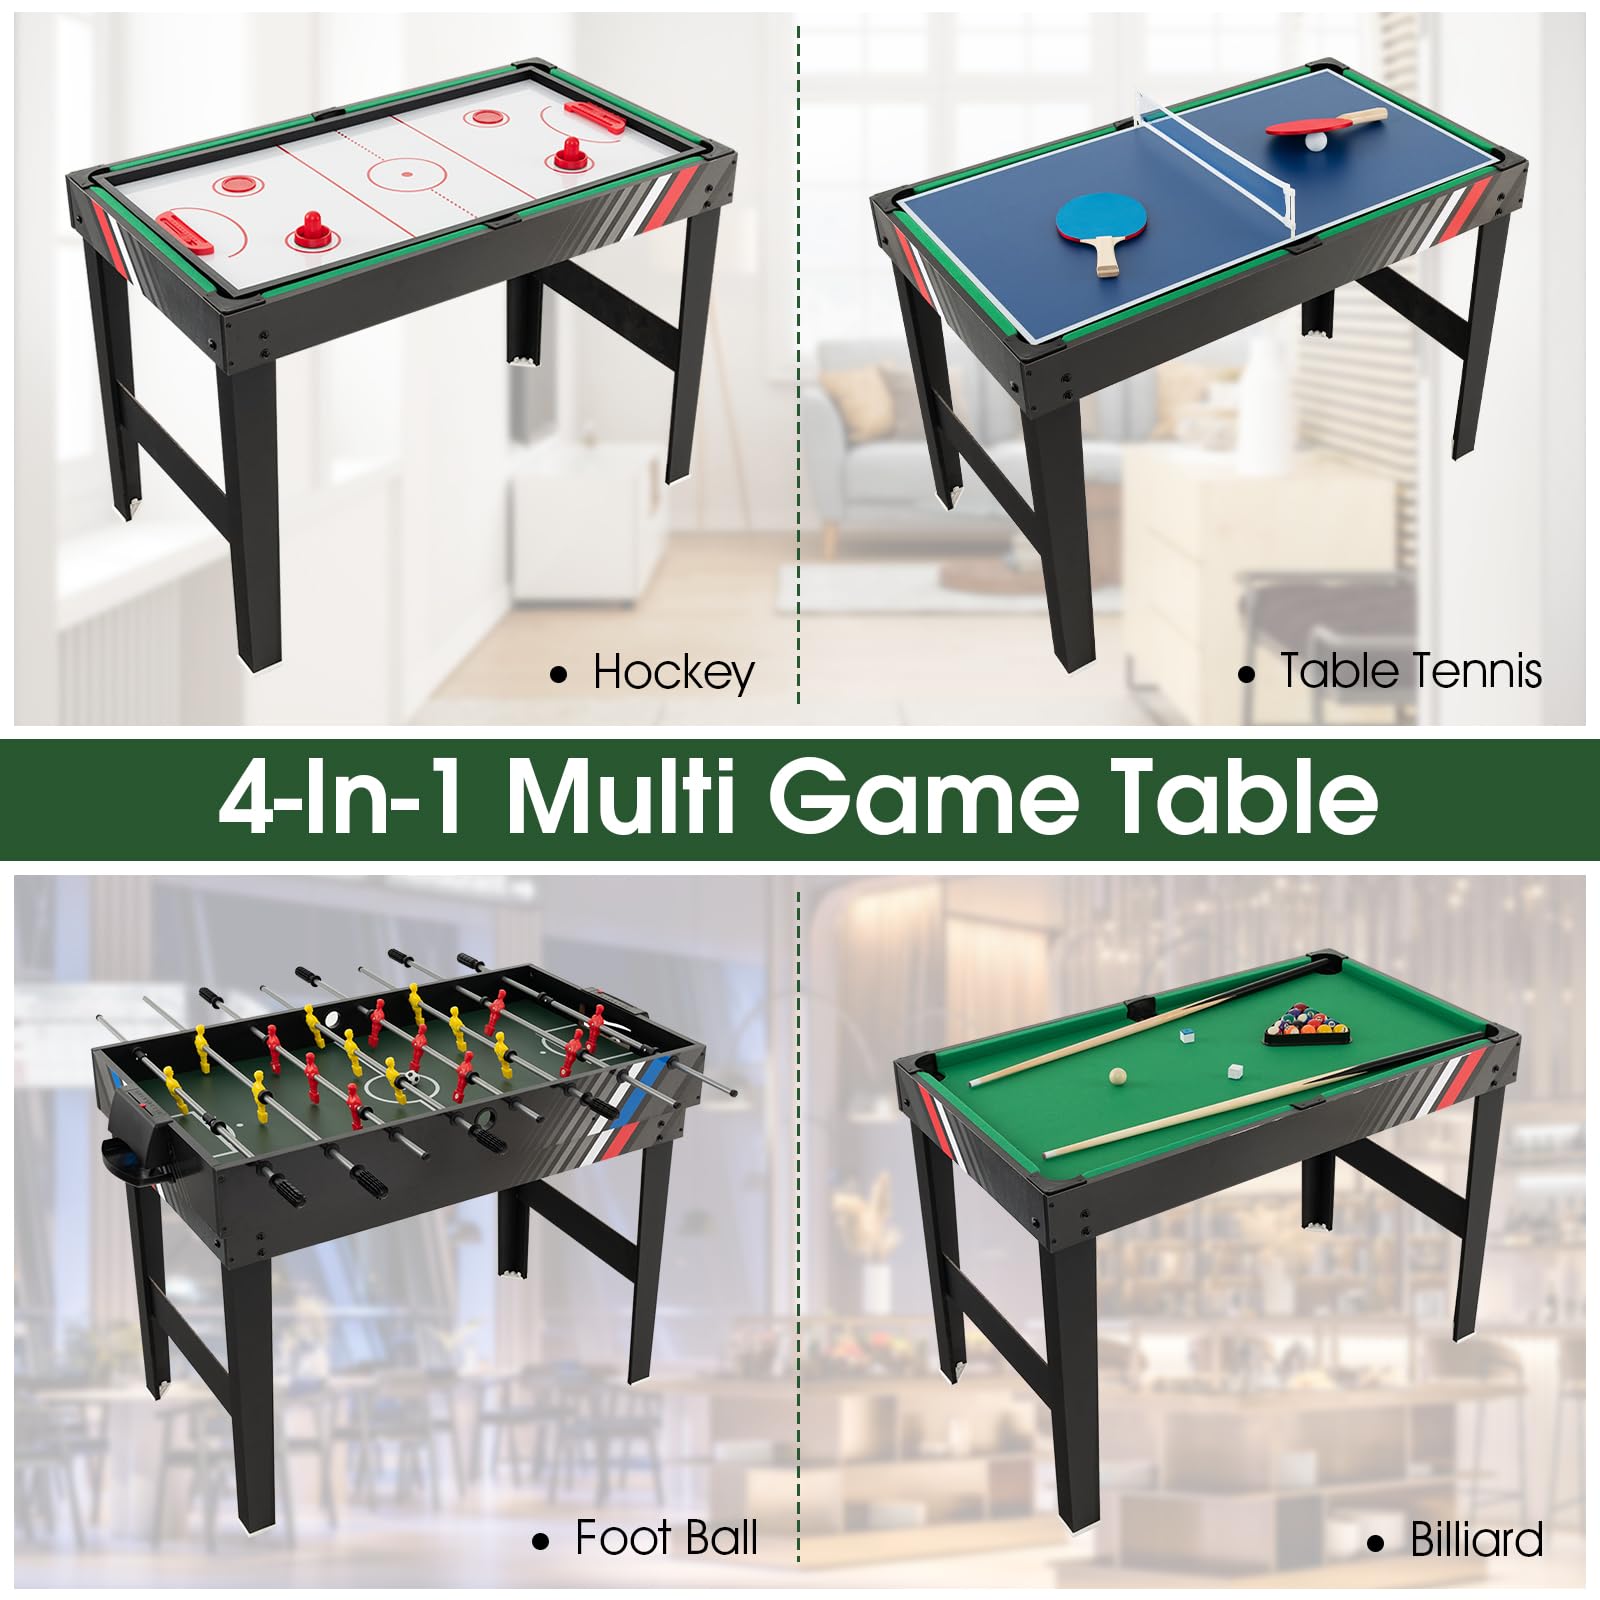 Giantex 4-in-1 Multi Game Table, 49 Inch Combination Game Tables with Adult Size Foosball Table